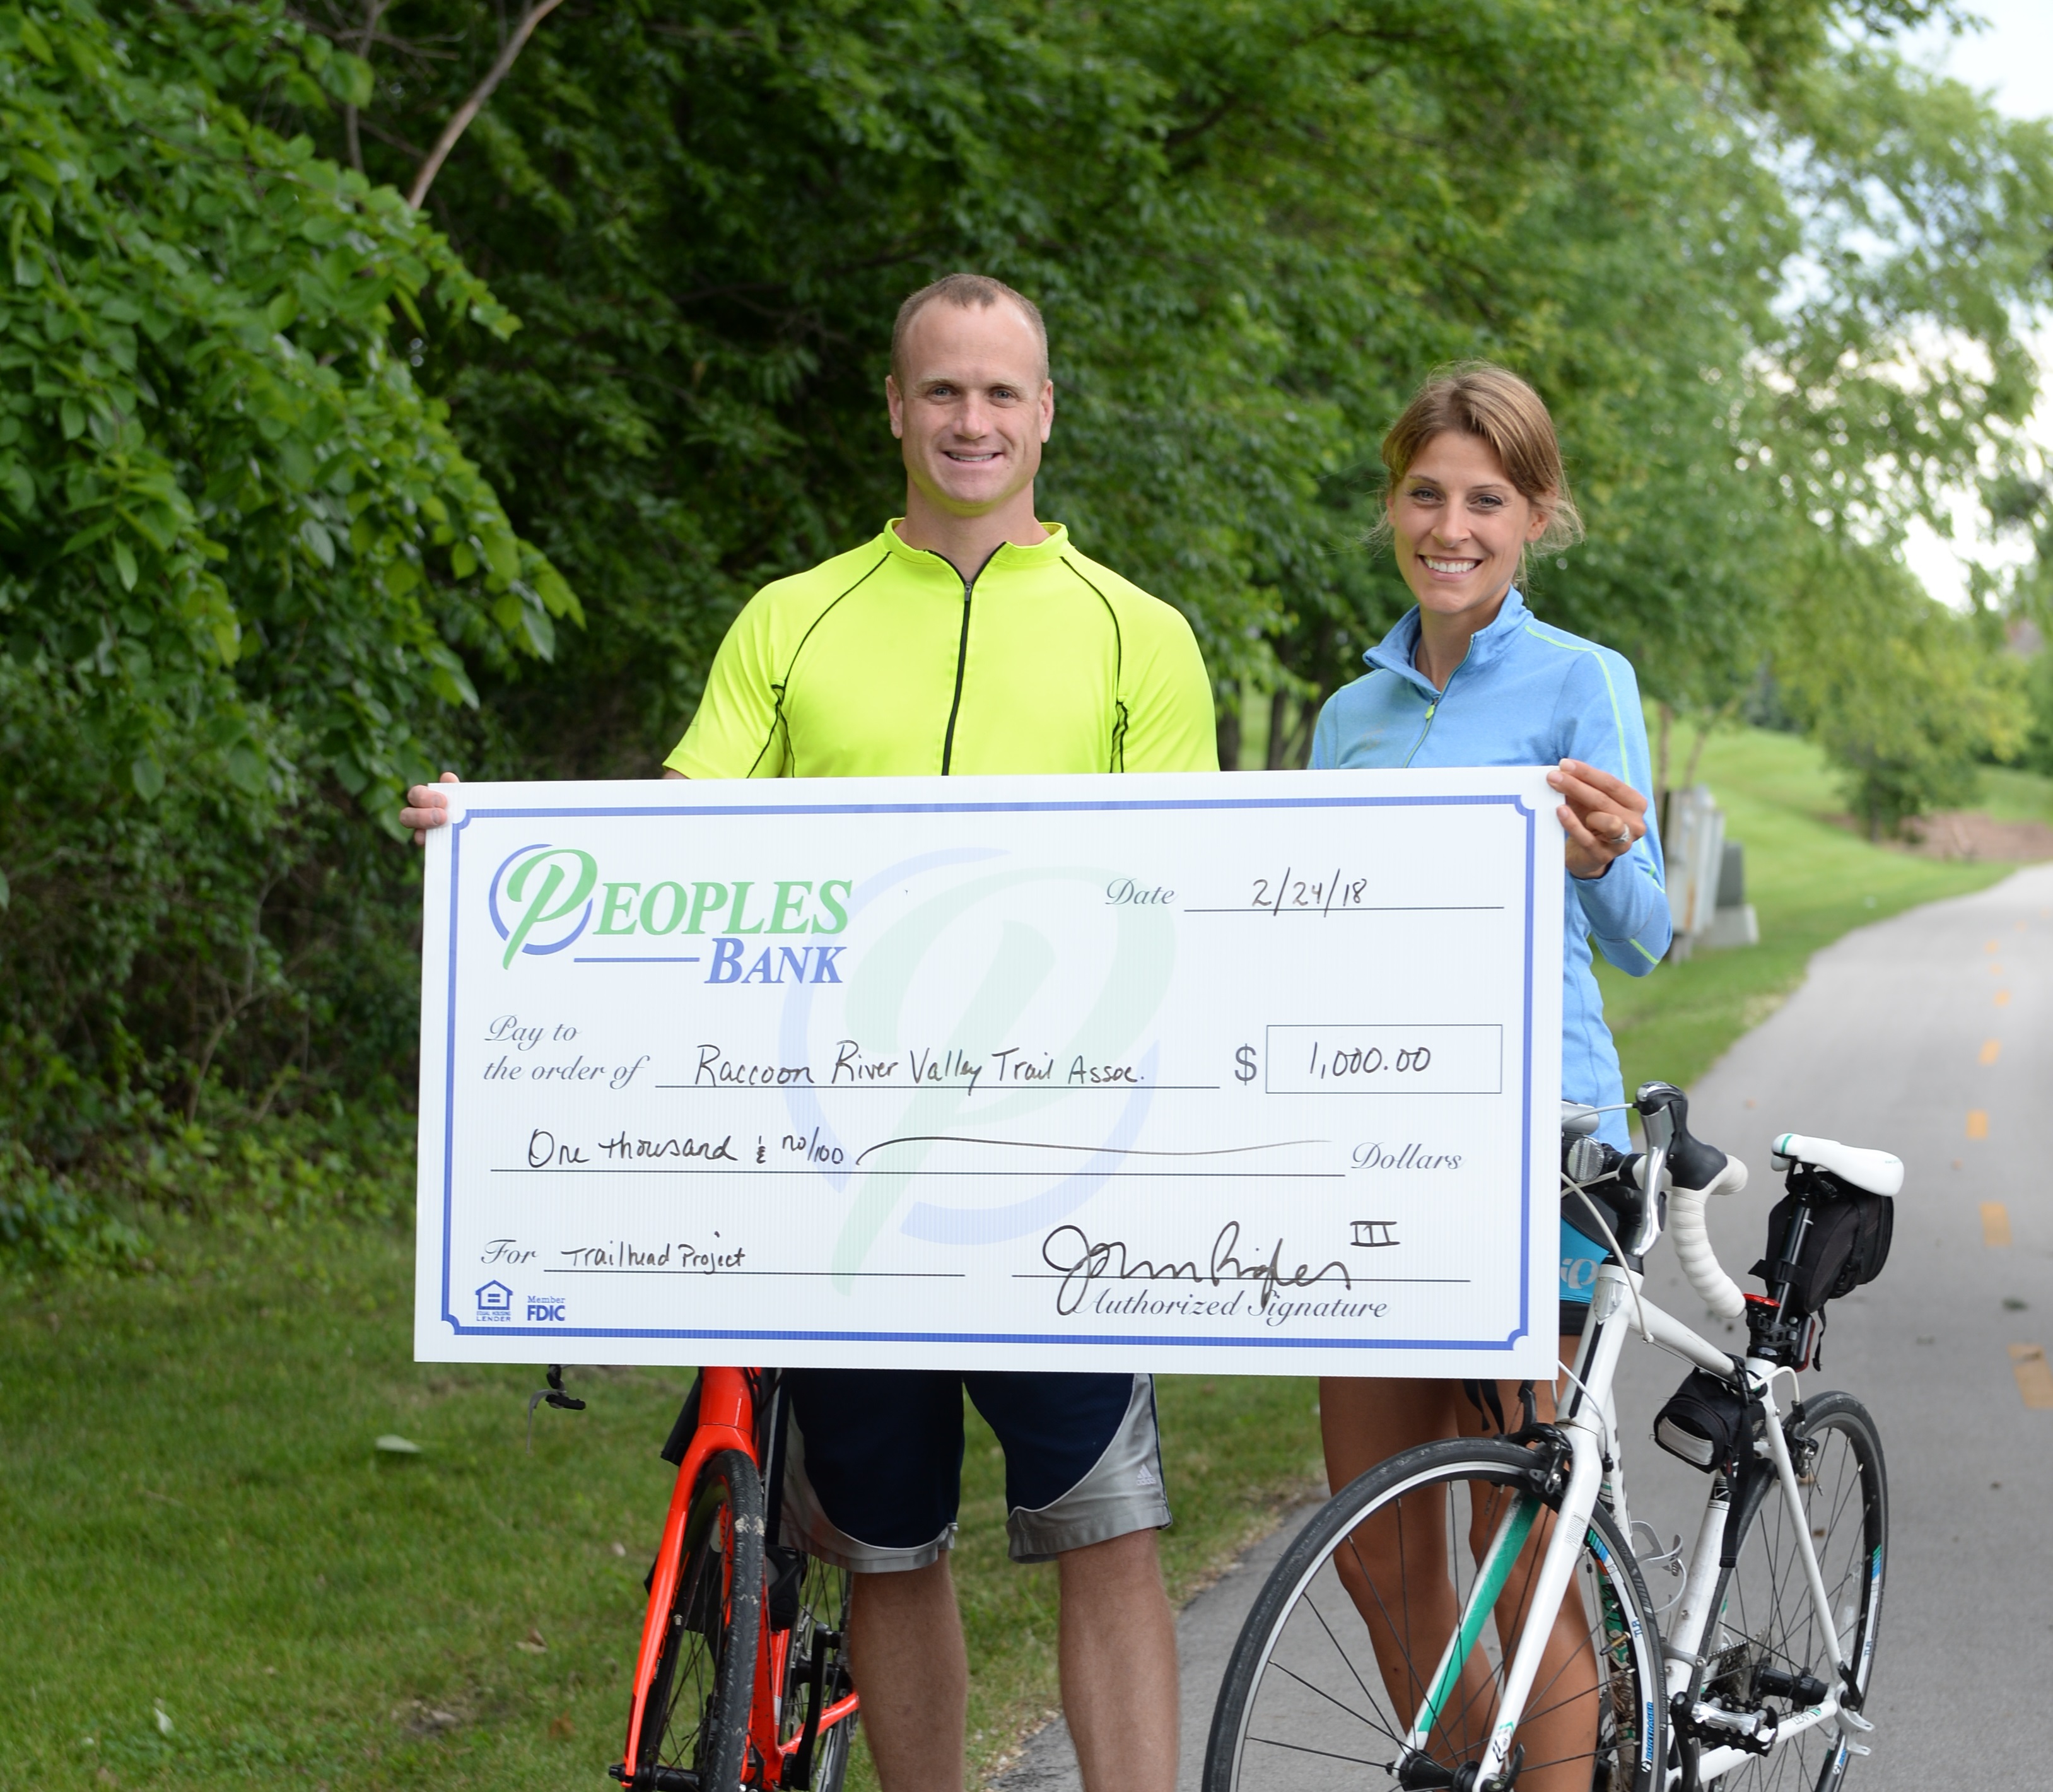 Peoples Bank promotes, values Raccoon River Valley Trail as Central Iowa gem